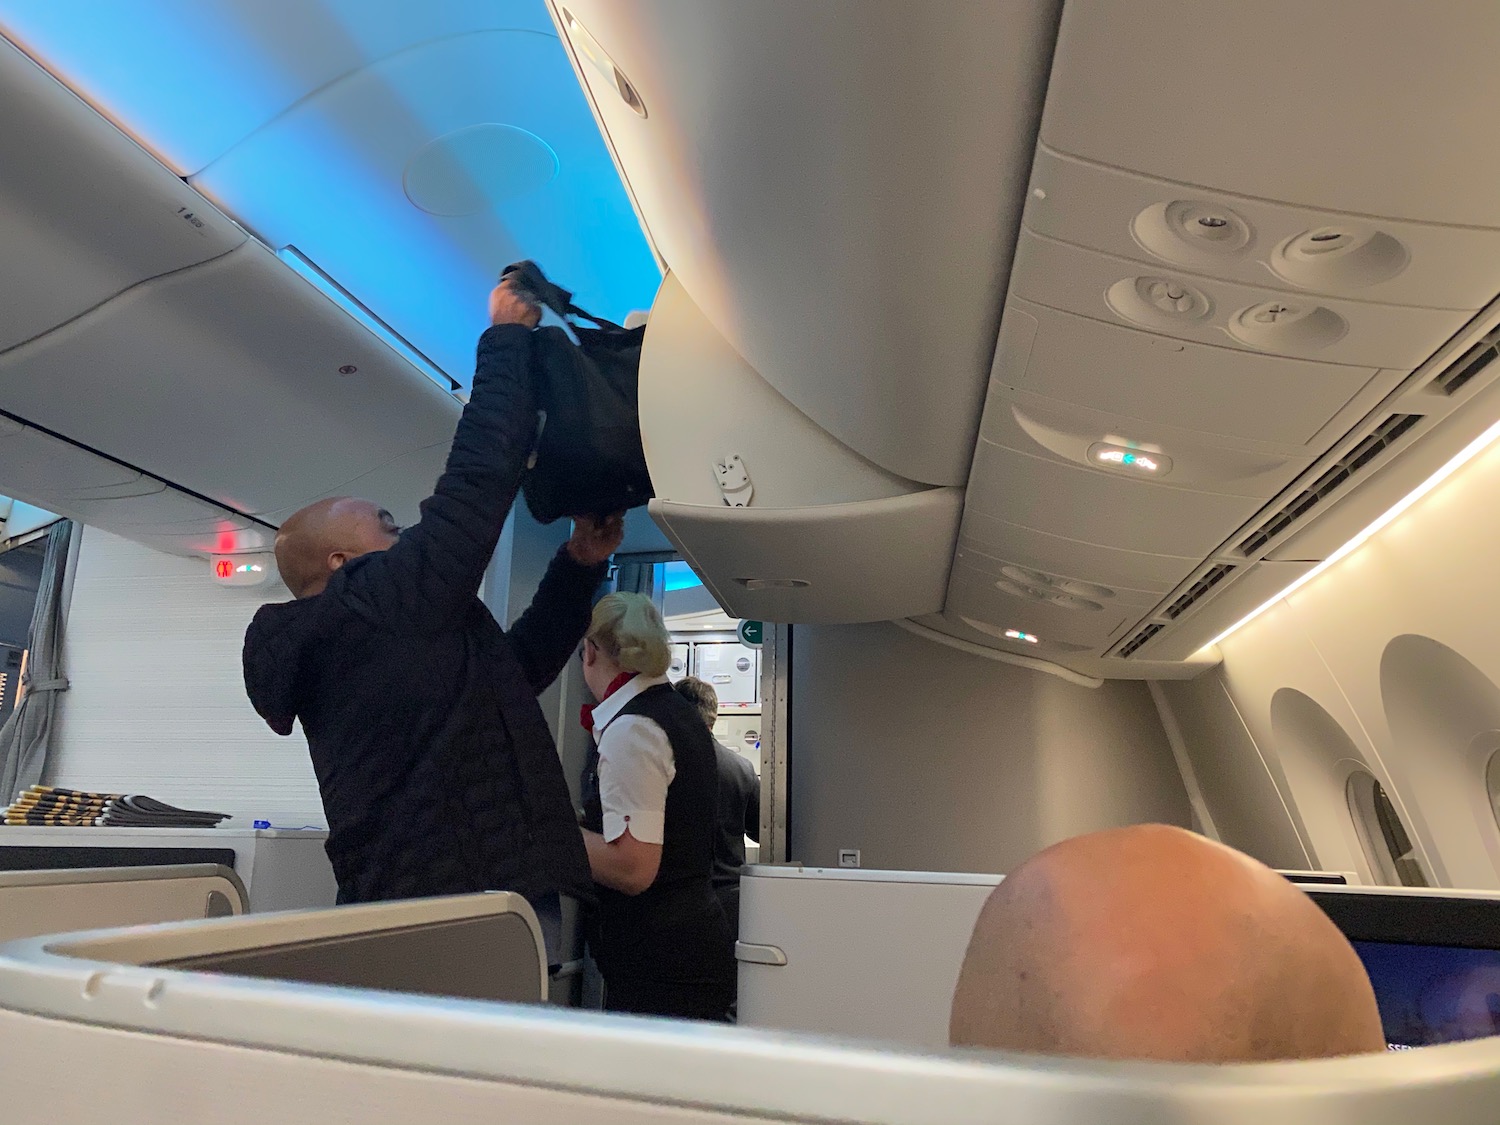 a man holding a bag in an airplane